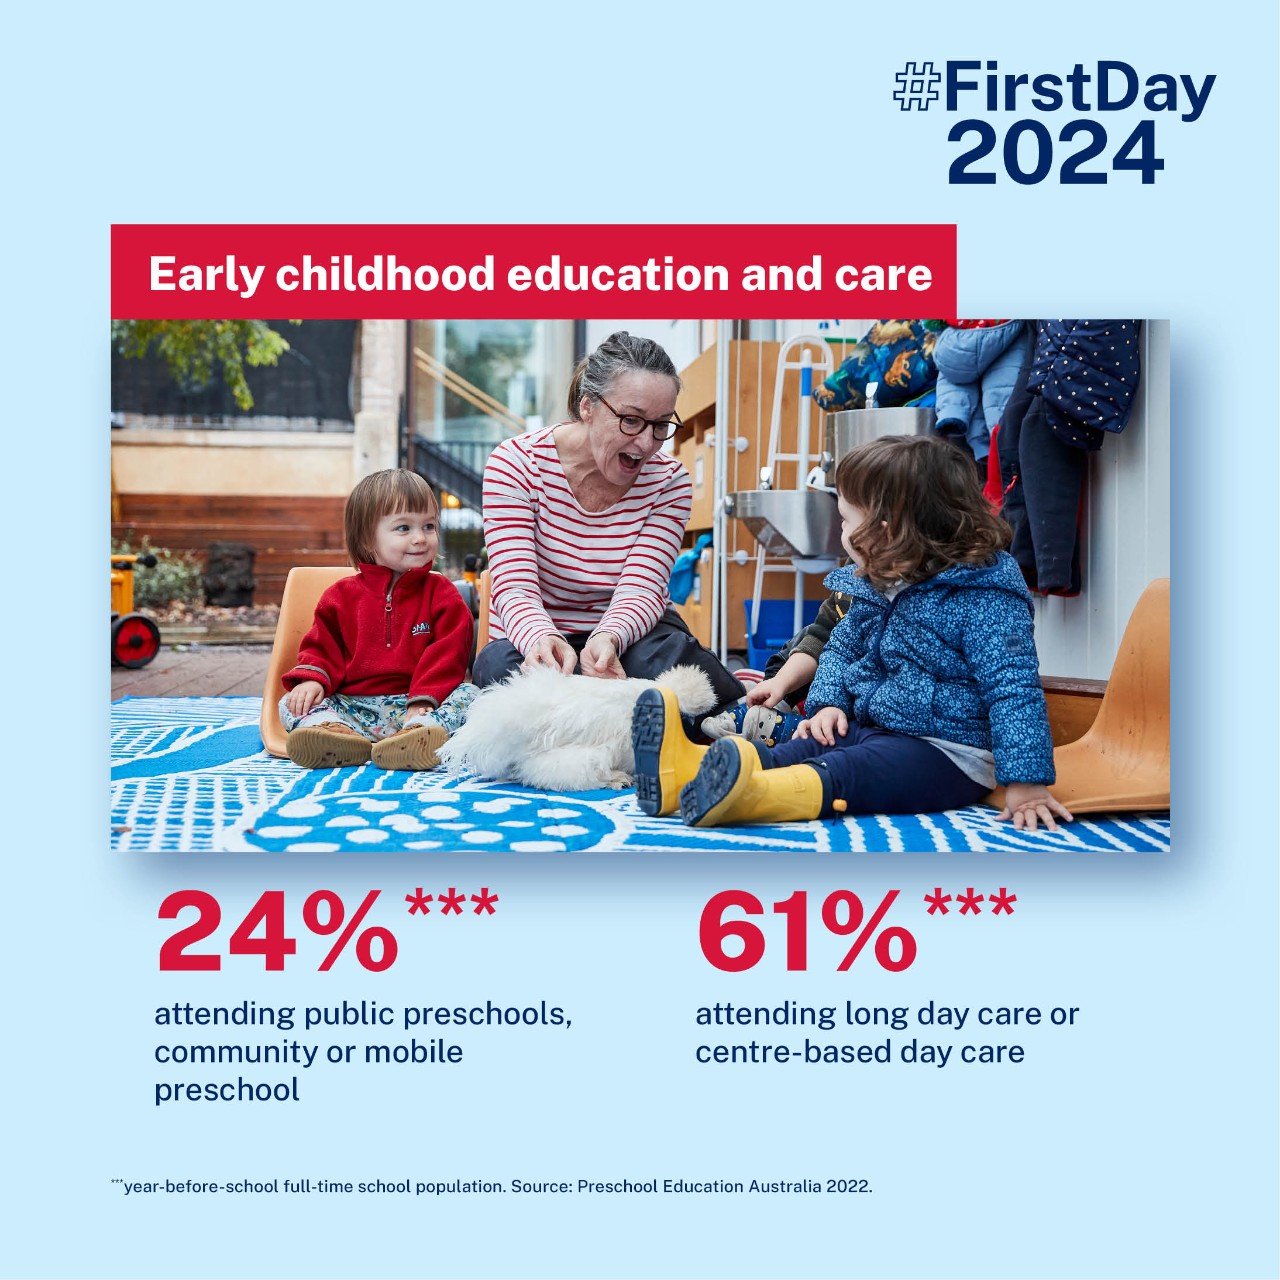 Infographic about early childhood education with stats like 184,000 children attending out of school hours care 24 percent attending public preschools, community or mobile preschool and 61 percent attending long day care or centre based day care